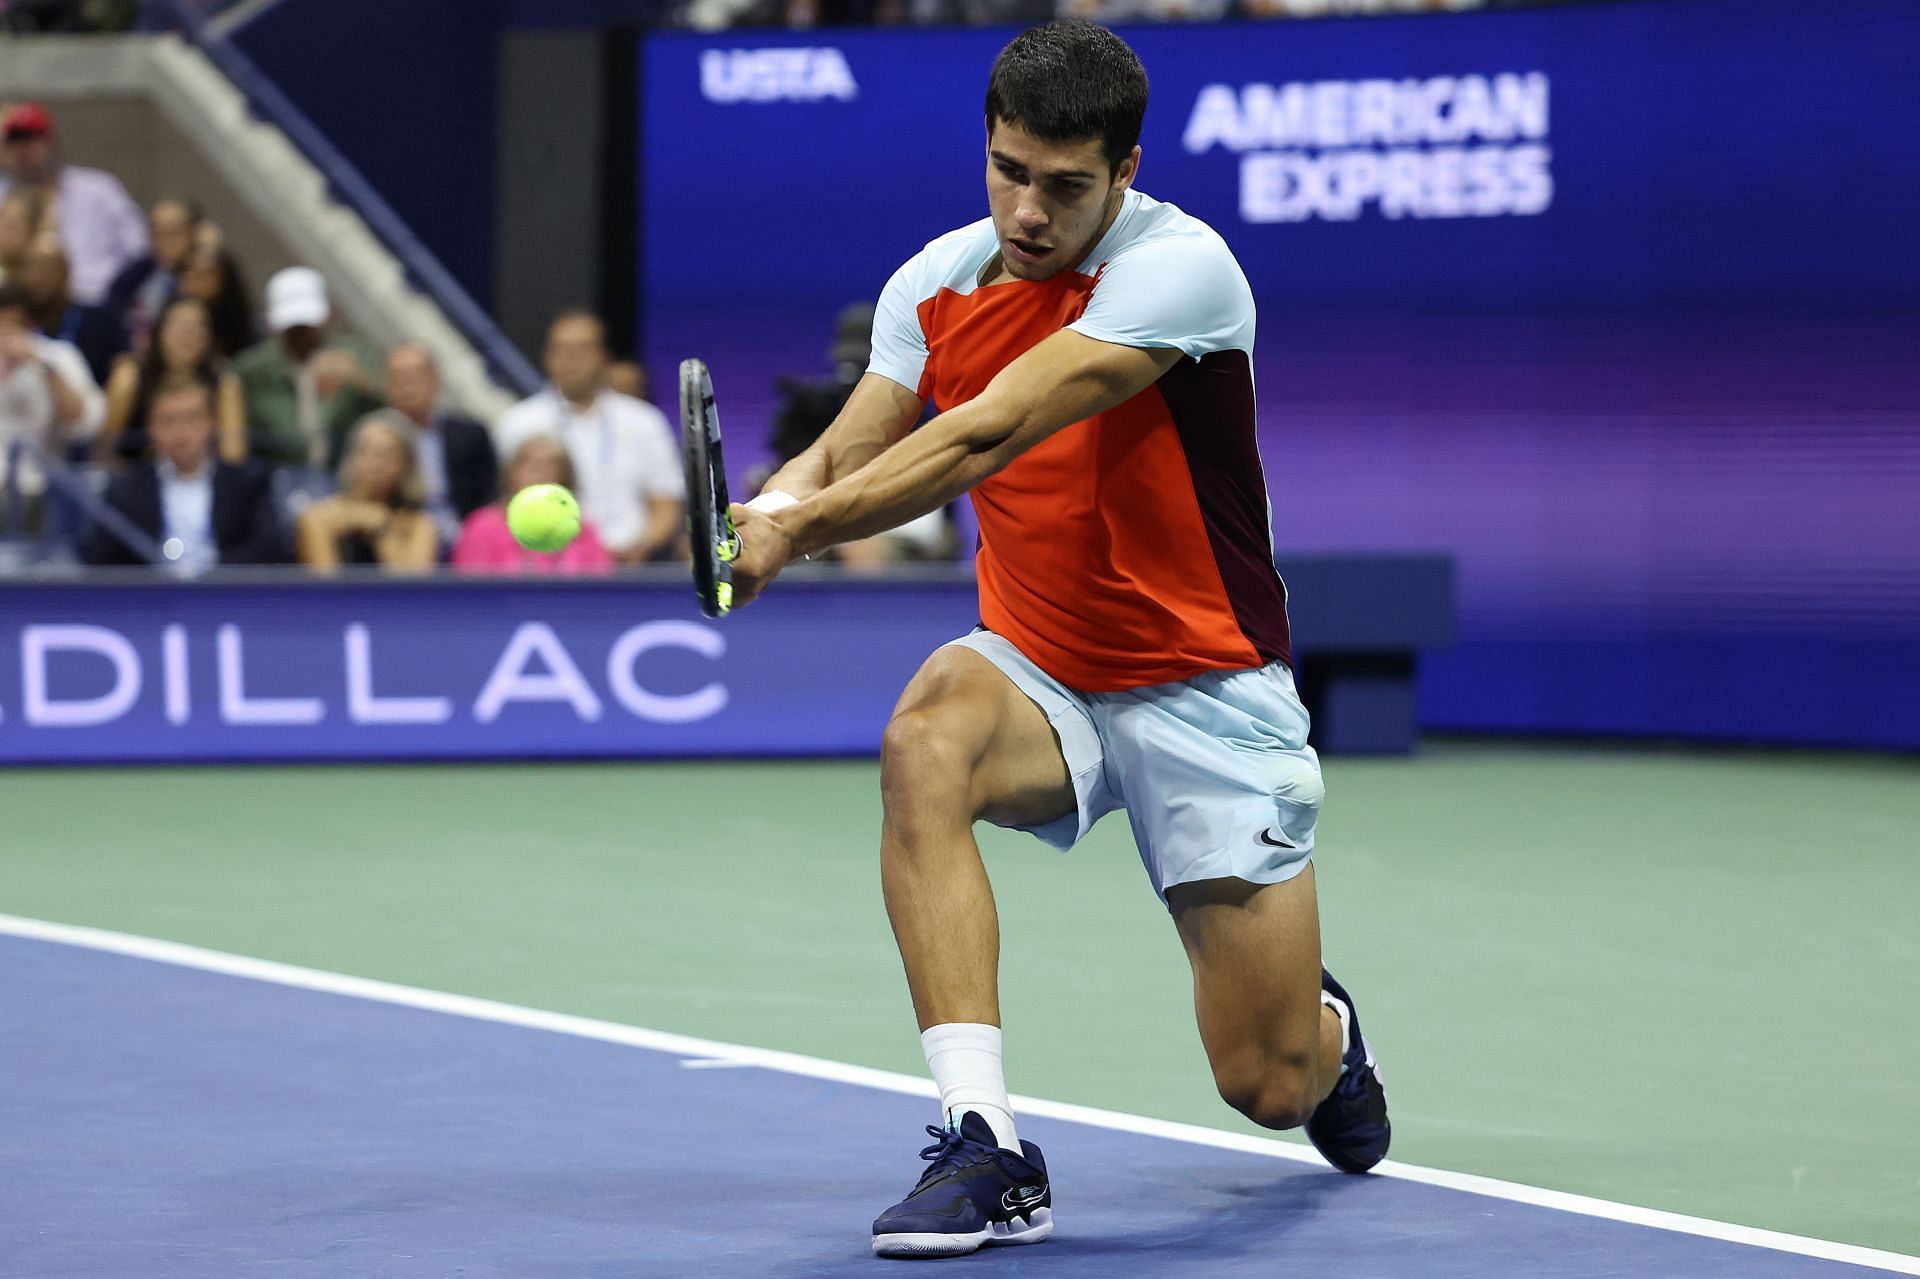 Alcaraz at the 2022 US Open - Day 12